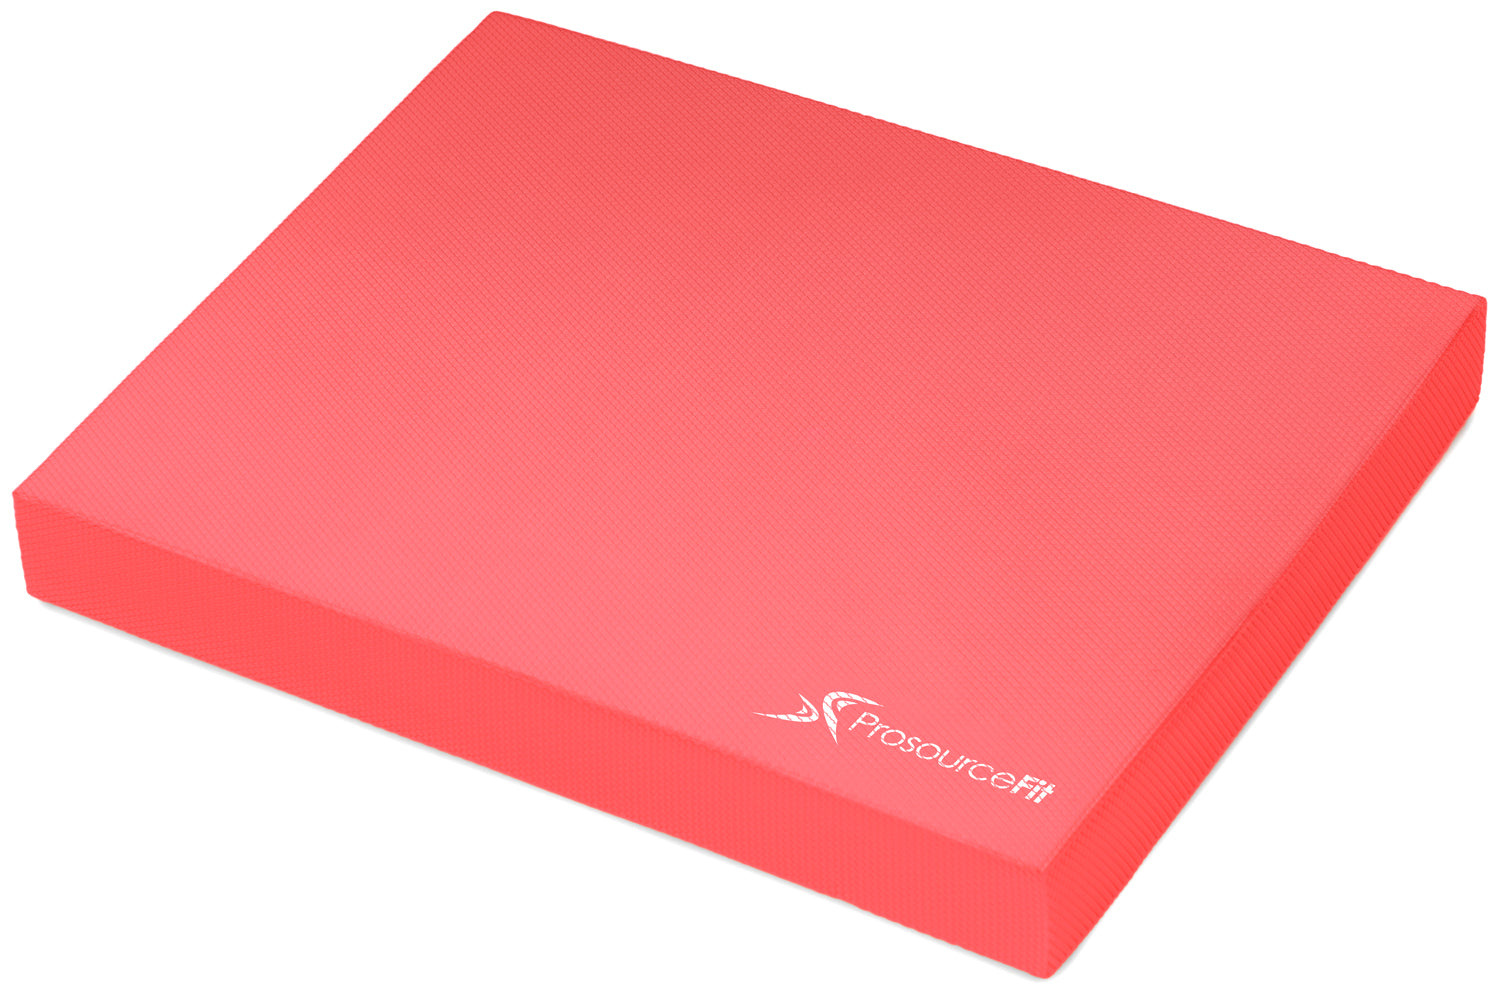 Red Exercise Balance Pad - Large